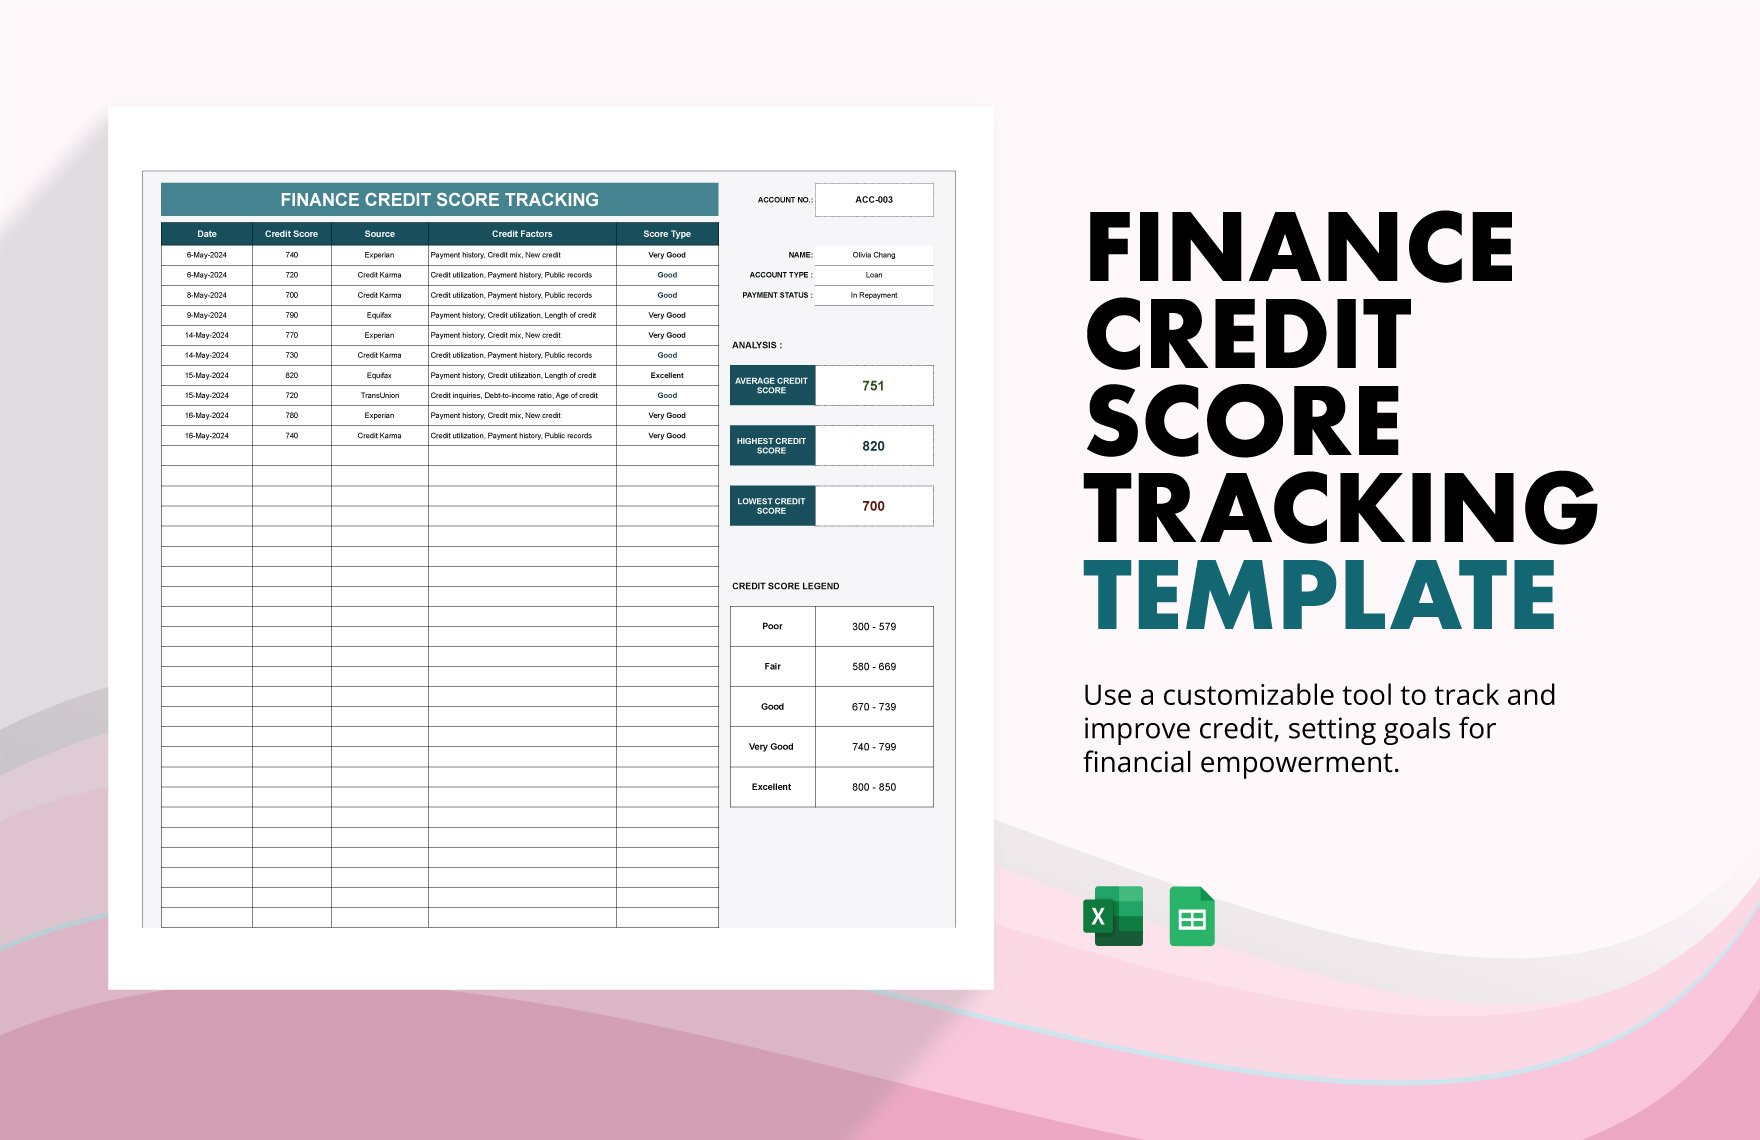 Finance Credit Score Tracking Template in Excel, Google Sheets